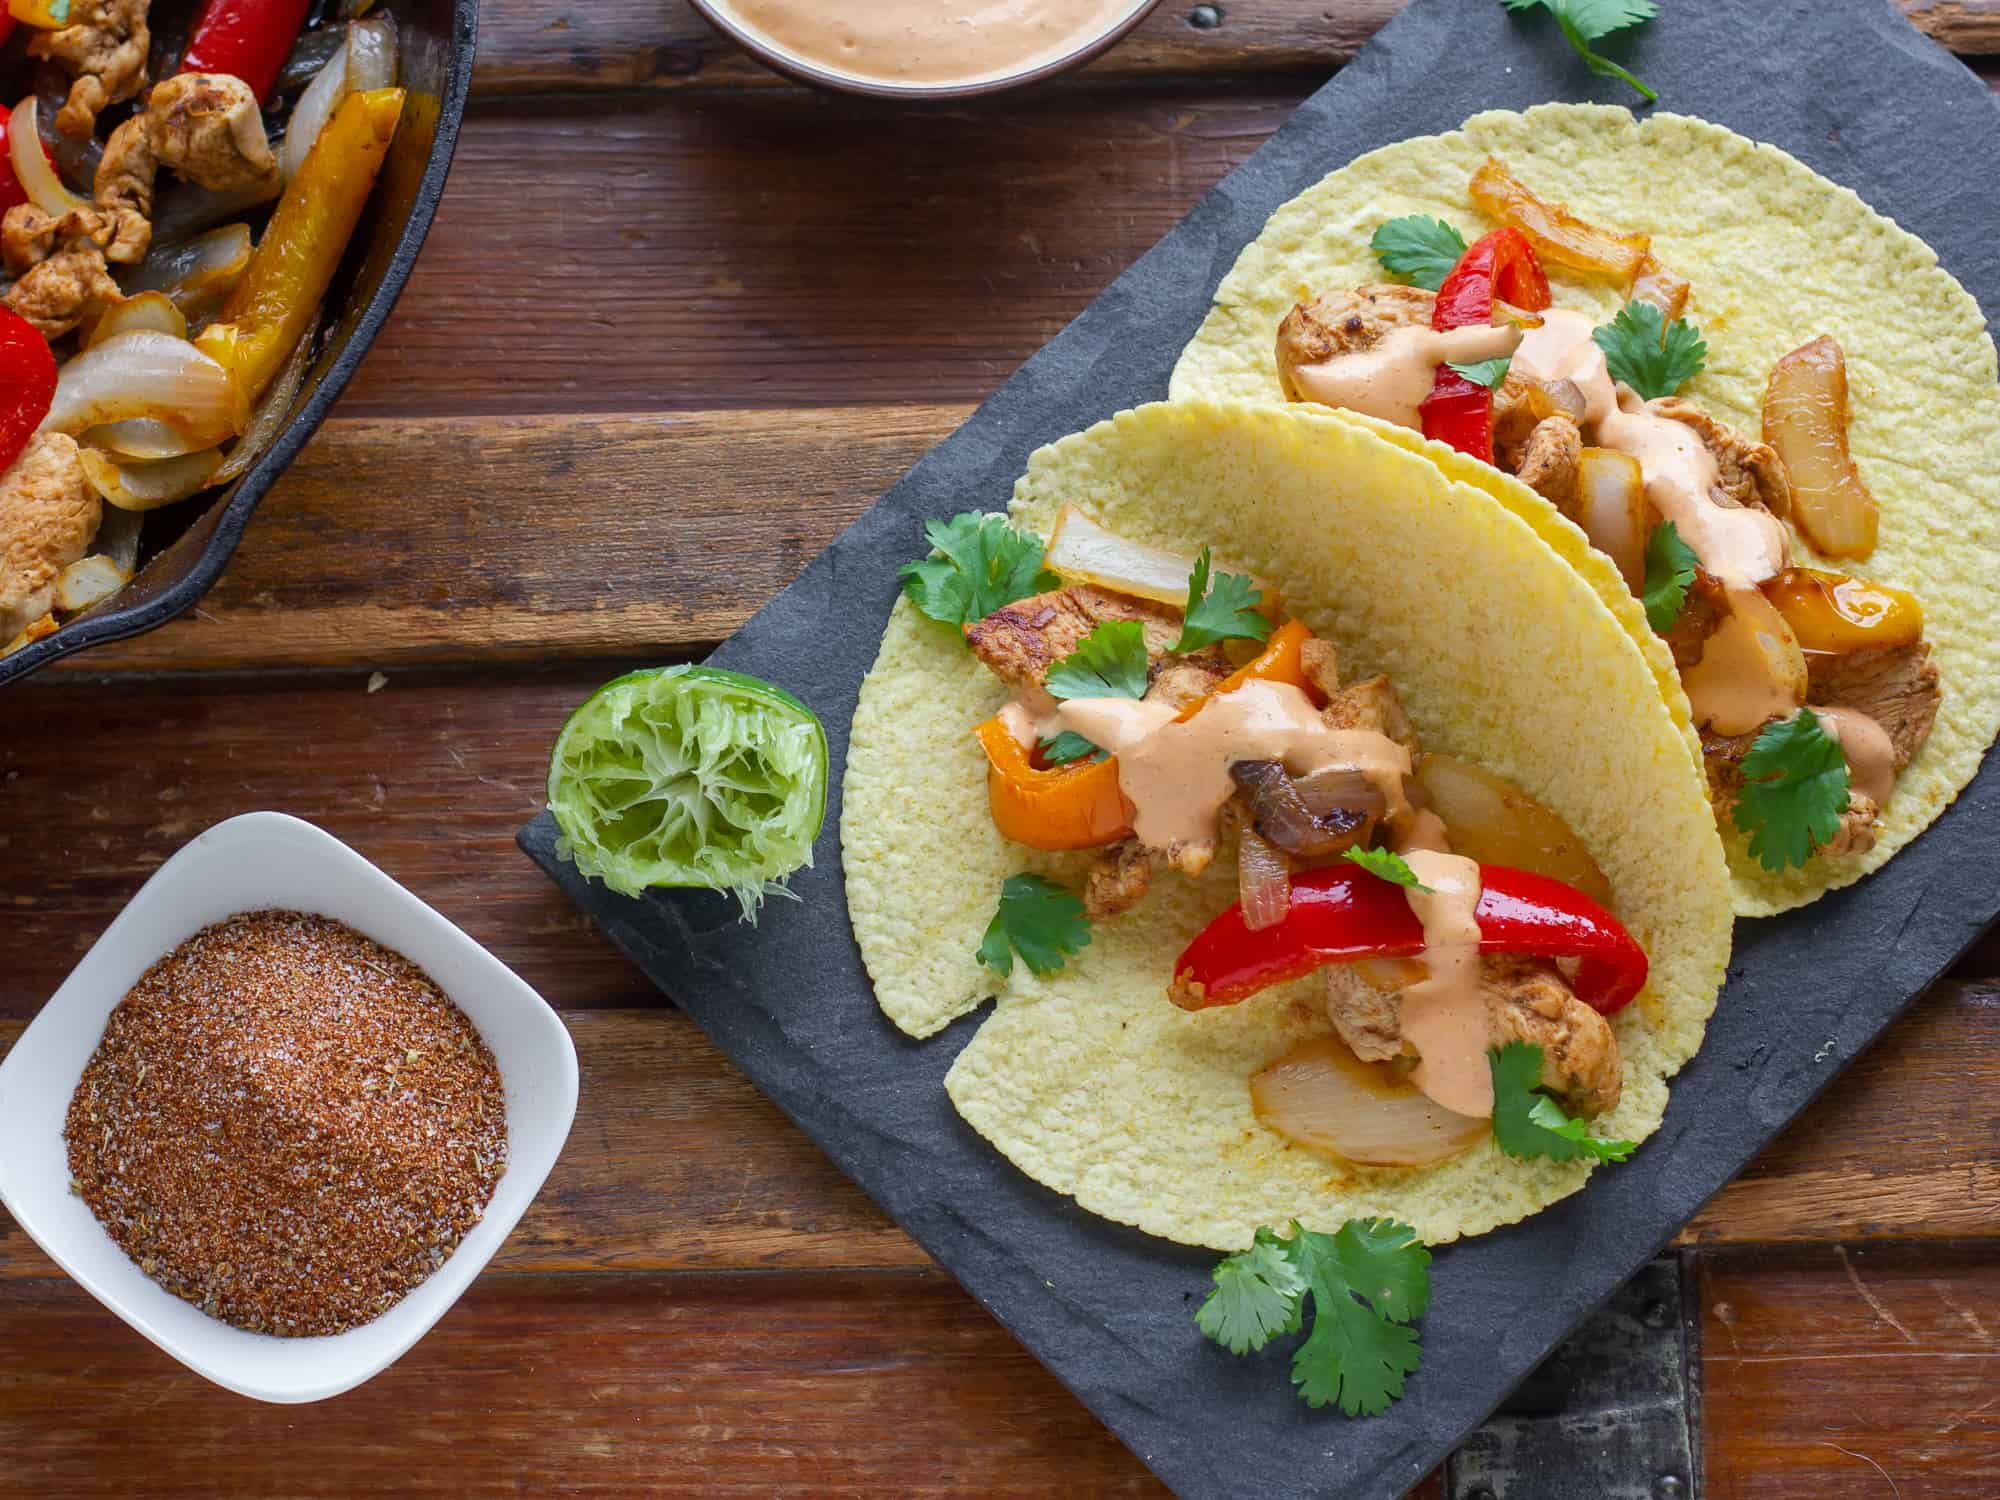 Never buy store-bought fajita mix again with this homemade fajita seasoning recipe, using pantry spices for chicken or steak fajitas or tacos.